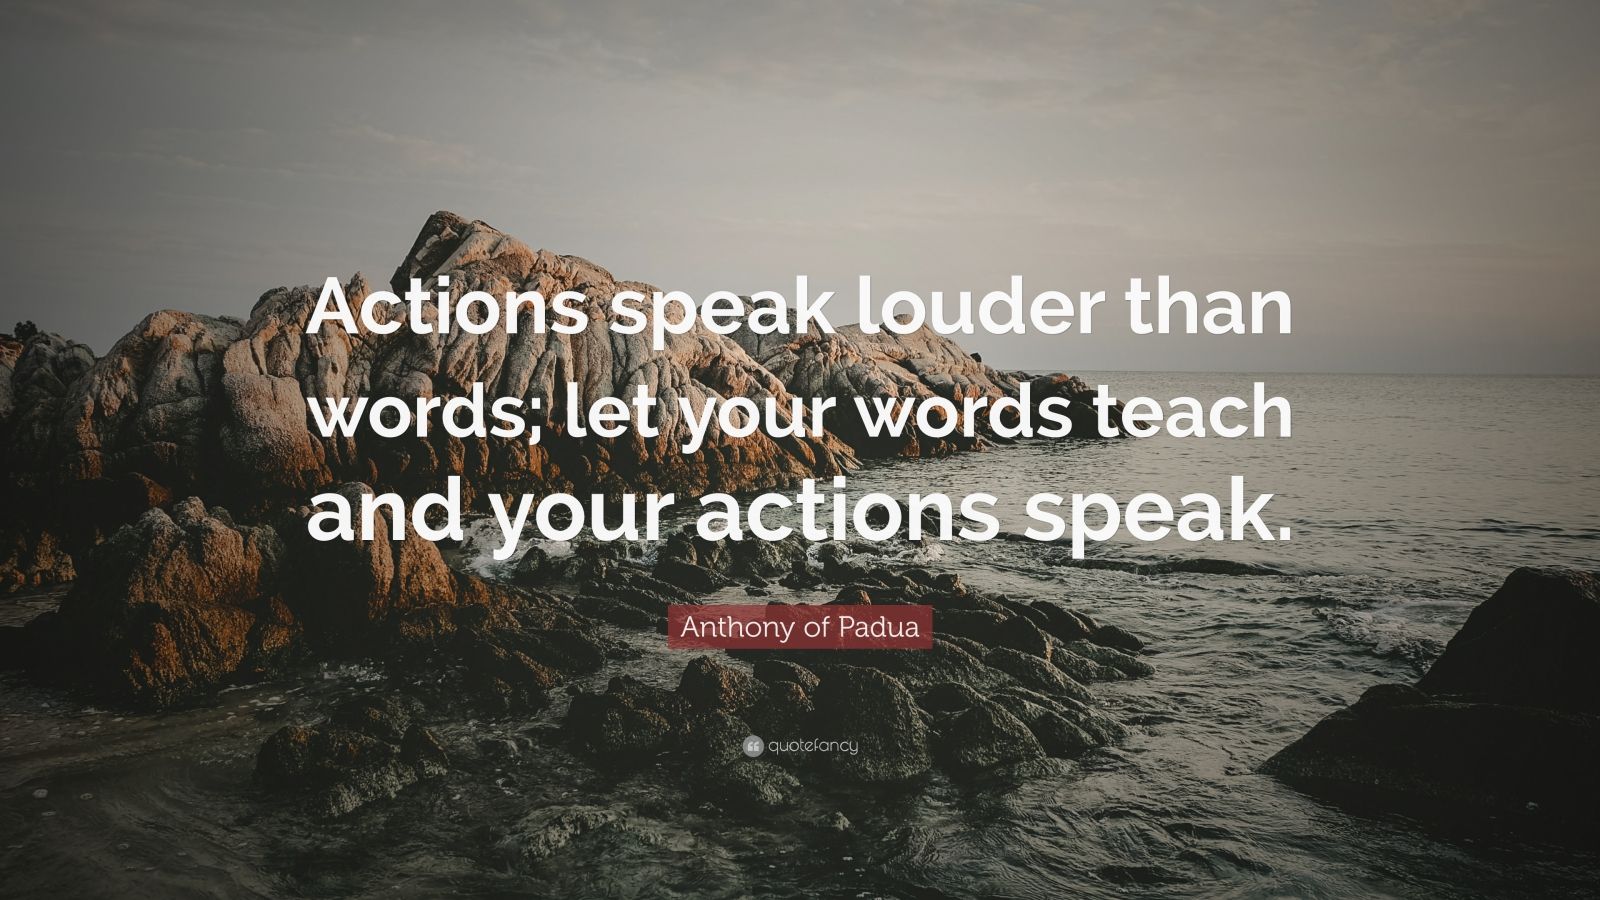 Anthony of Padua Quote: “Actions speak louder than words; let your